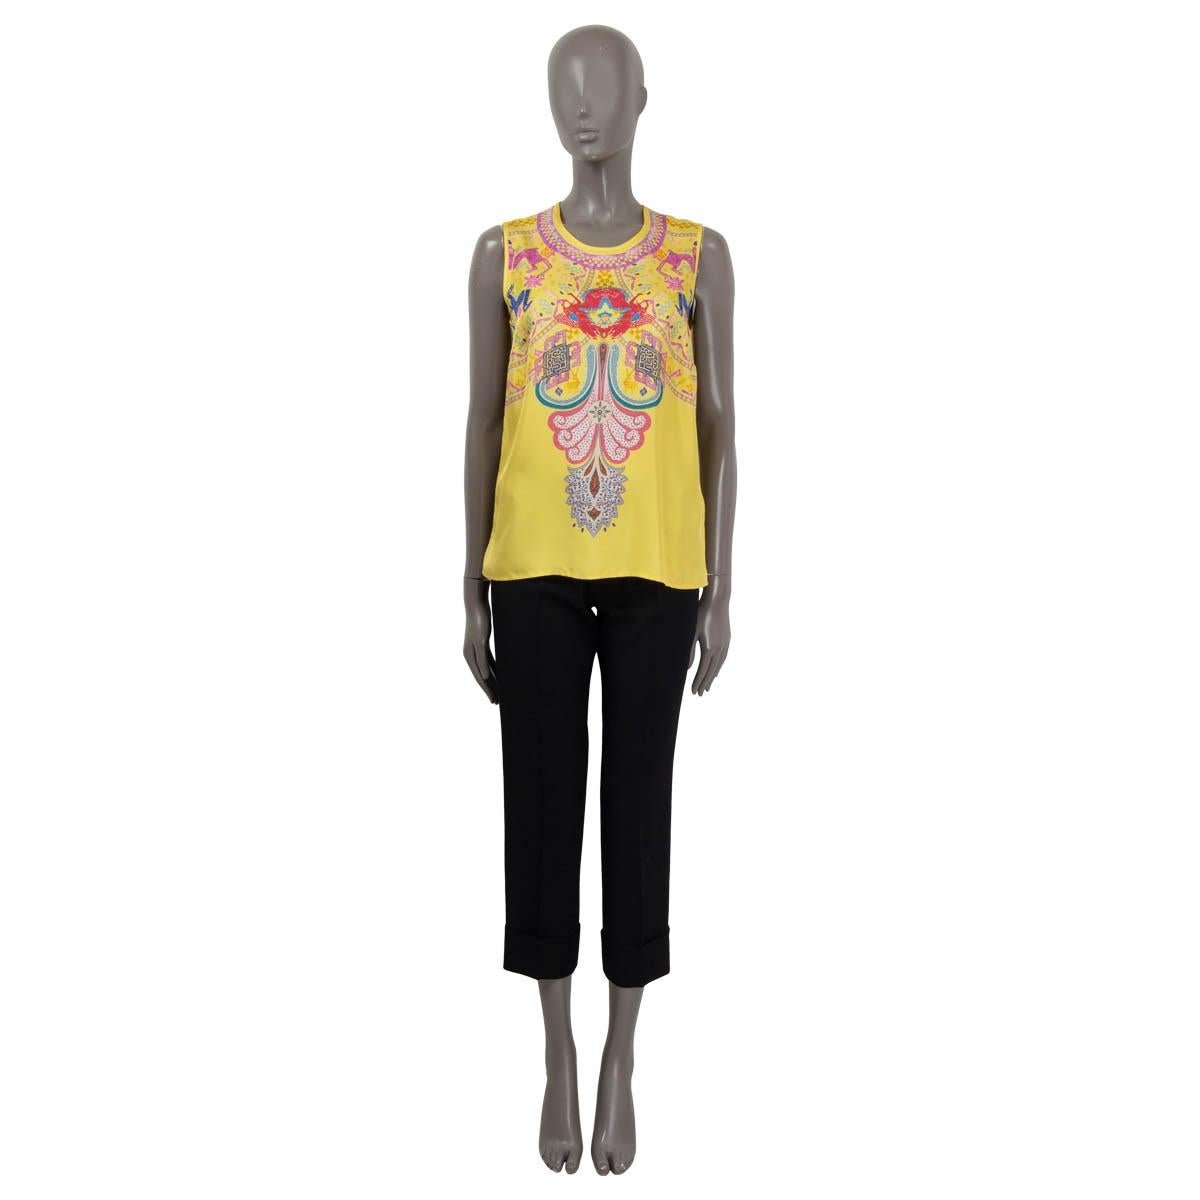 100% authentic Etro sleeveless native print blouse in yellow, blue, red, pink, lilac, white and grey silk (100%) with a buttoned back. Has been worn and is in excellent condition. 

Measurements
Tag Size	42
Size	M
Shoulder Width	35cm (13.7in)
Bust